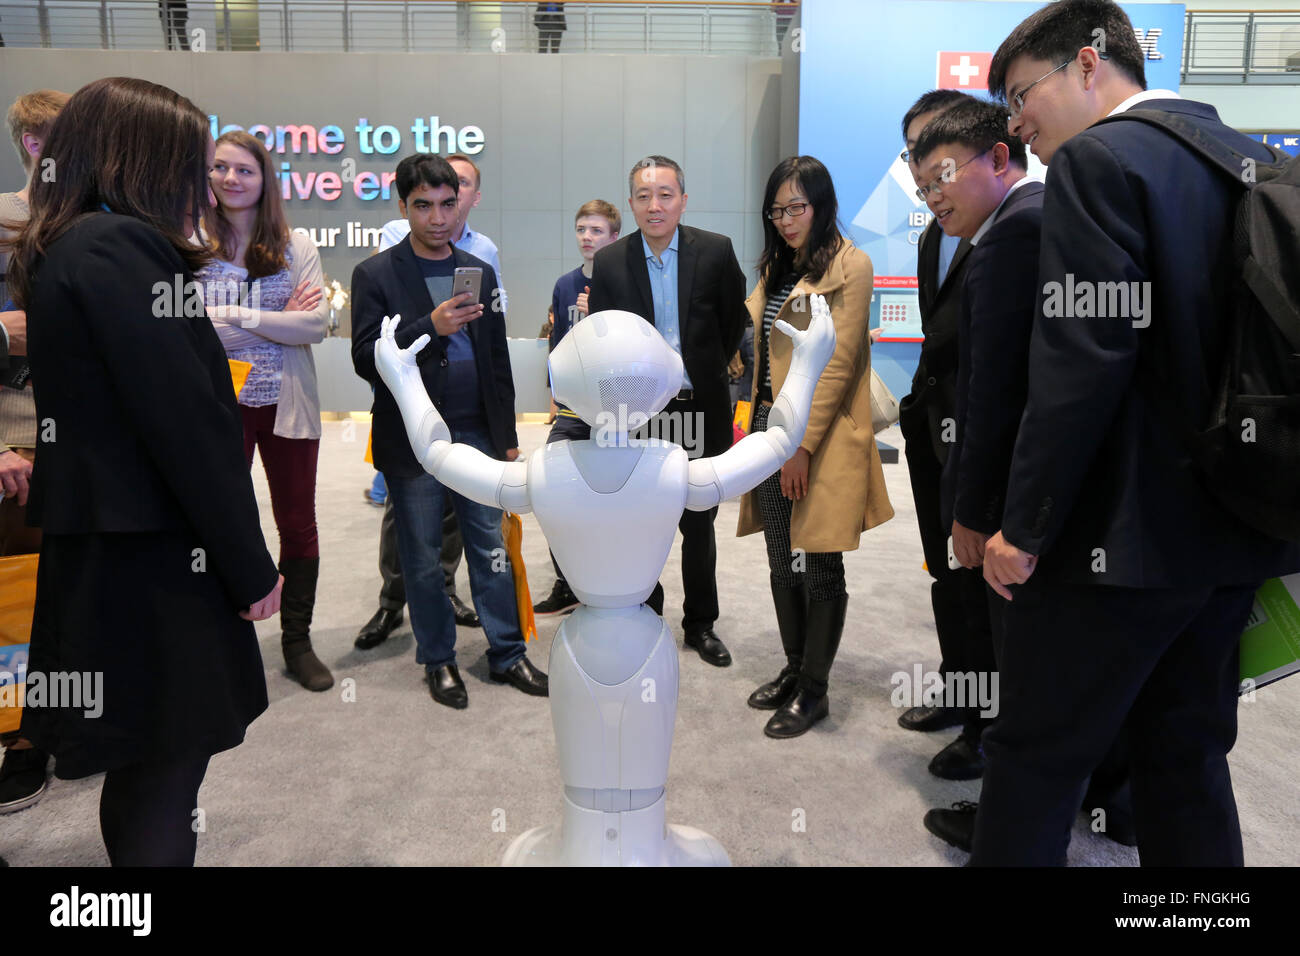 Germany, Hannover, 14.03.2016: CeBIT computer trade fair, booth of IBM Germany. Humanoid robot is programmed to analyze people and their facial expressions and gestures and to respond appropriately to these emotional states. Stock Photo